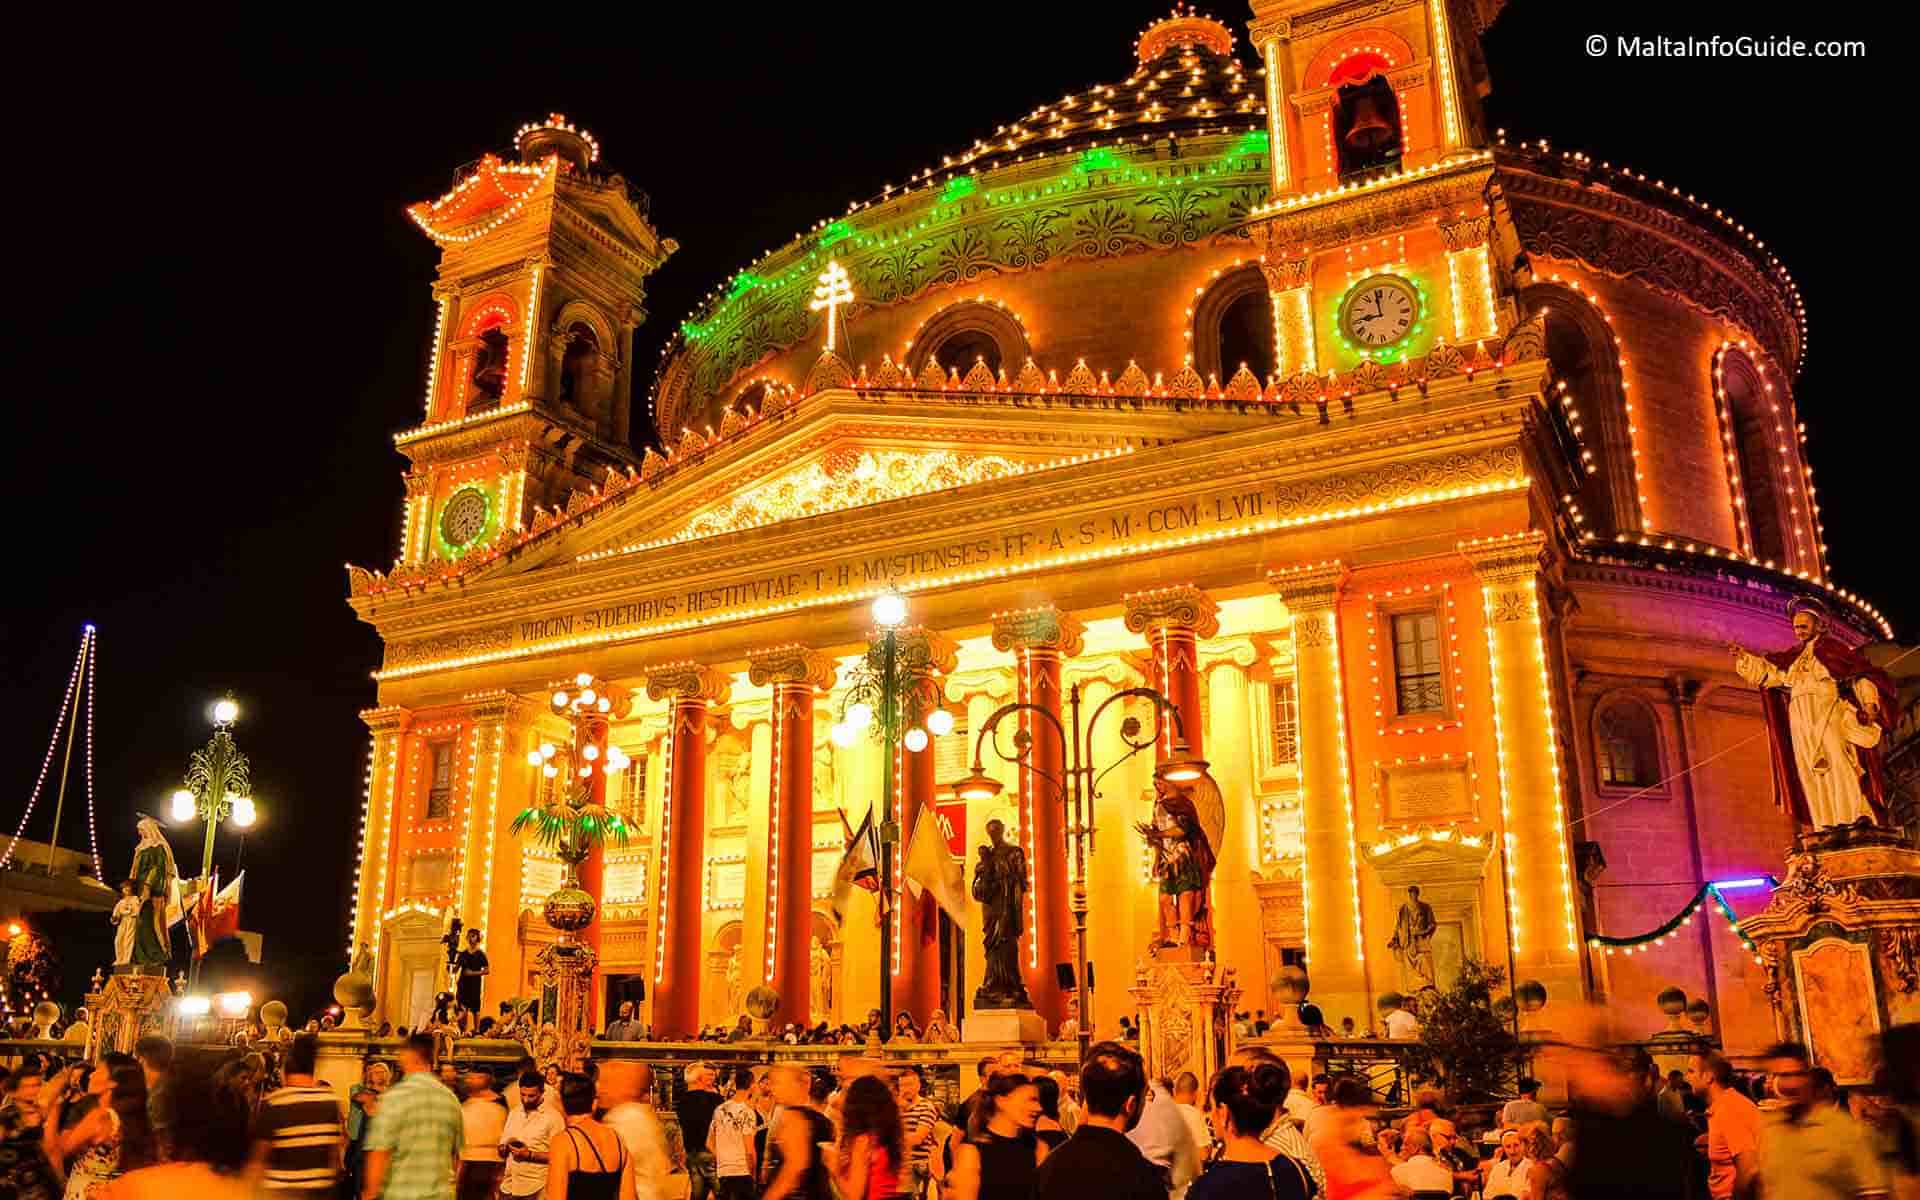 Mosta church facade lit up on the day of the feast.